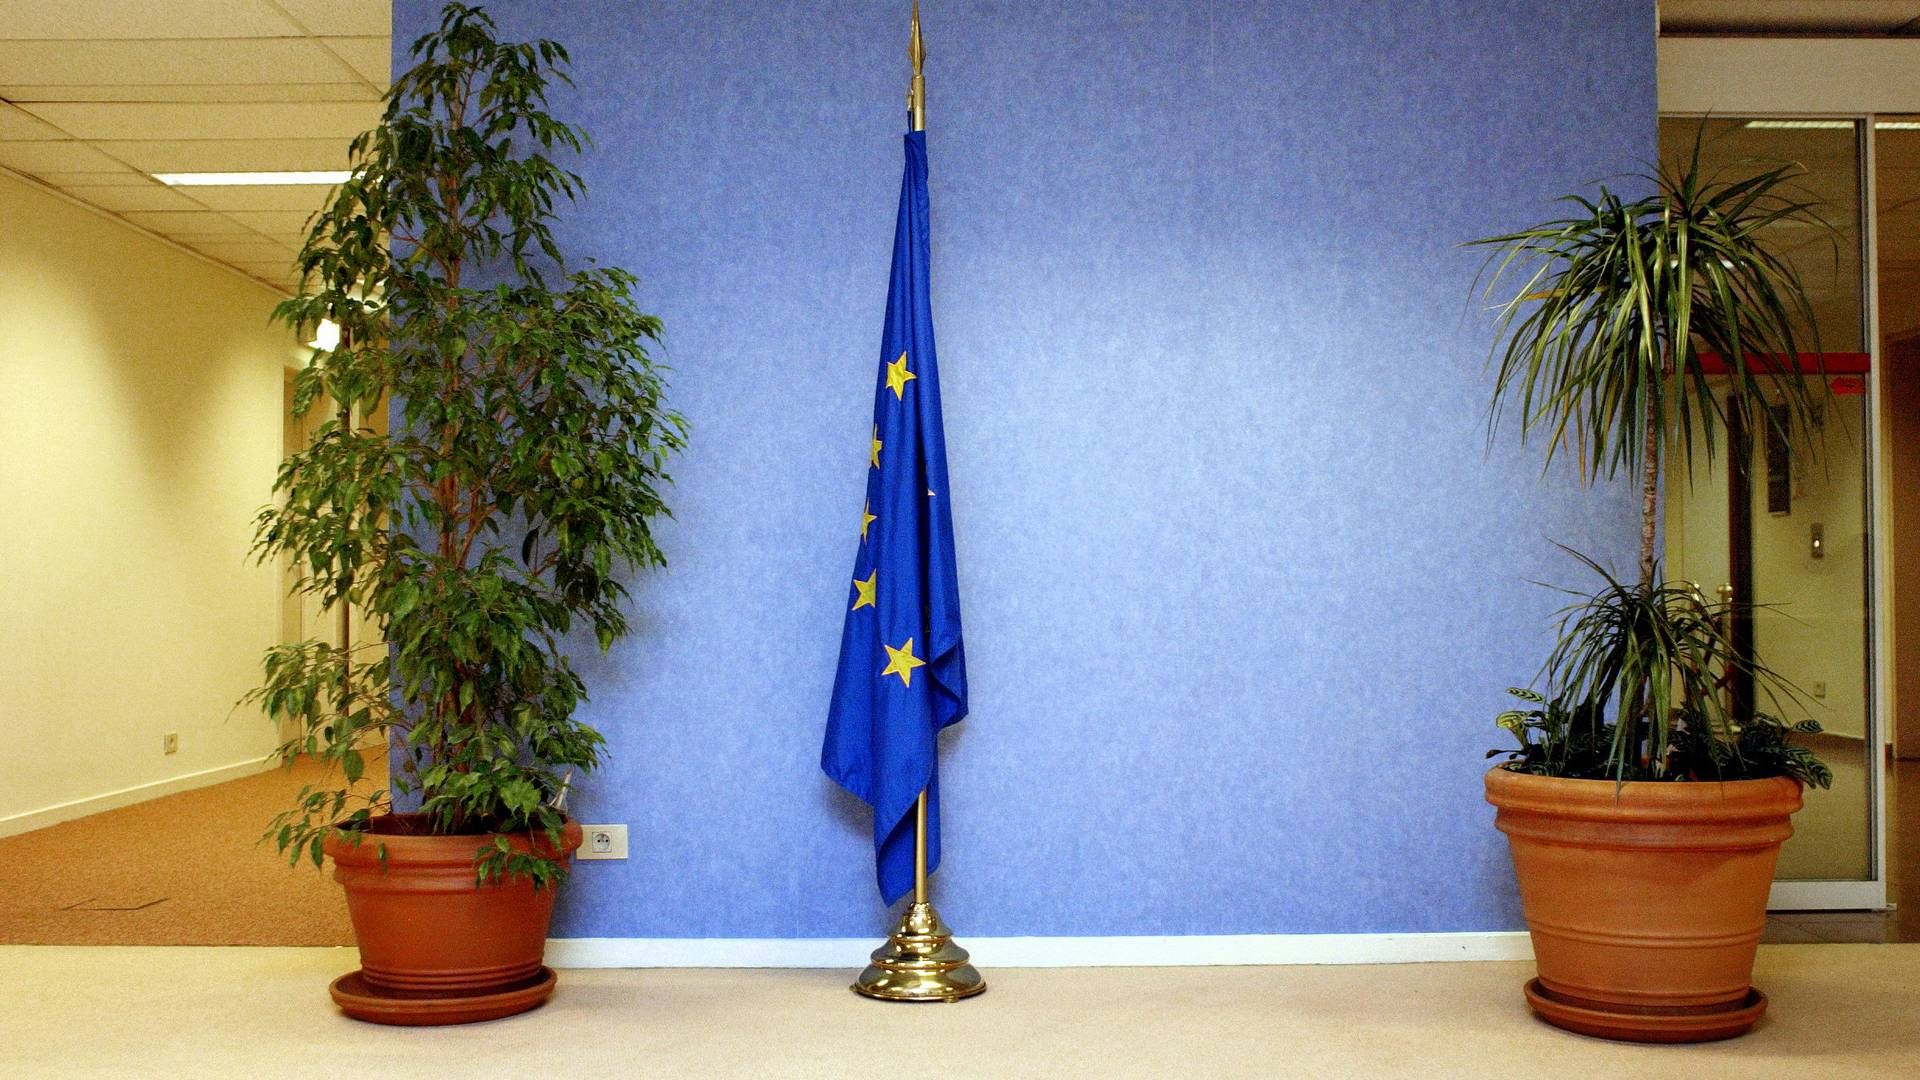 Consumer organizations assert an unusual degree of lobbyism in the EU by the financial sector in connection to the expected legislative proposal. | Photo: Miriam Dalsgaard